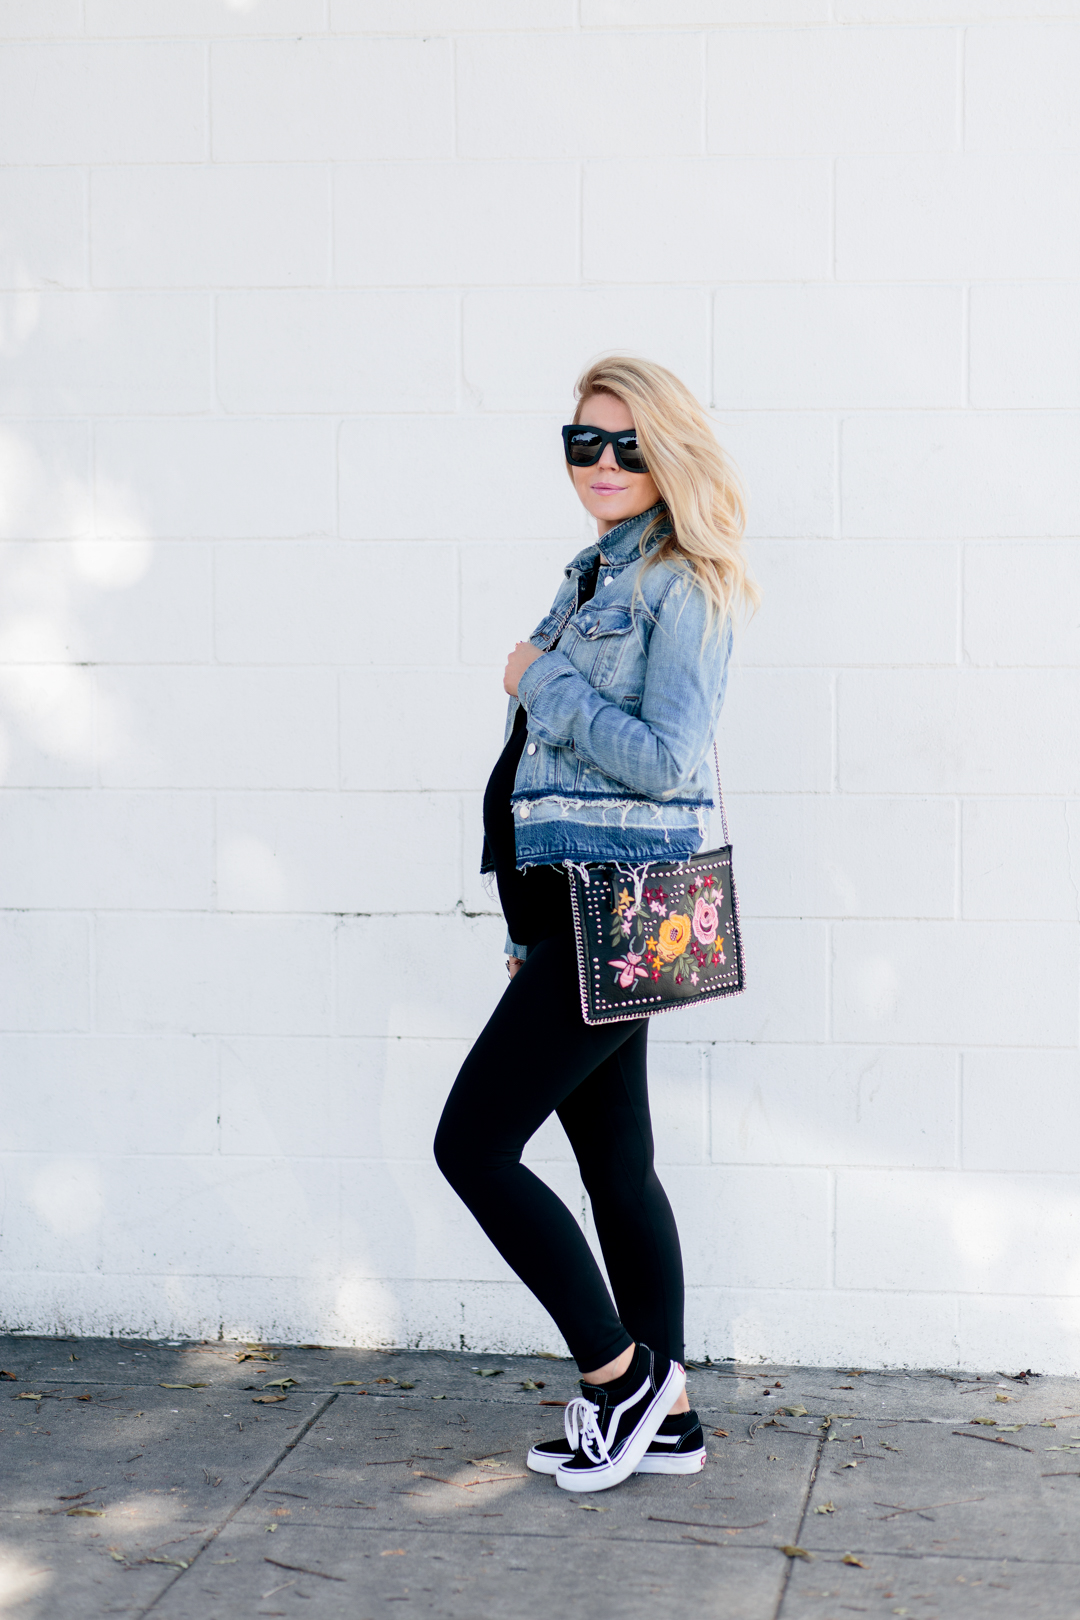 Lisa Allen of LunchPails and Lipstick wearing a J Brand denim jacket with black leggings, a topshop embroidered bag and vans